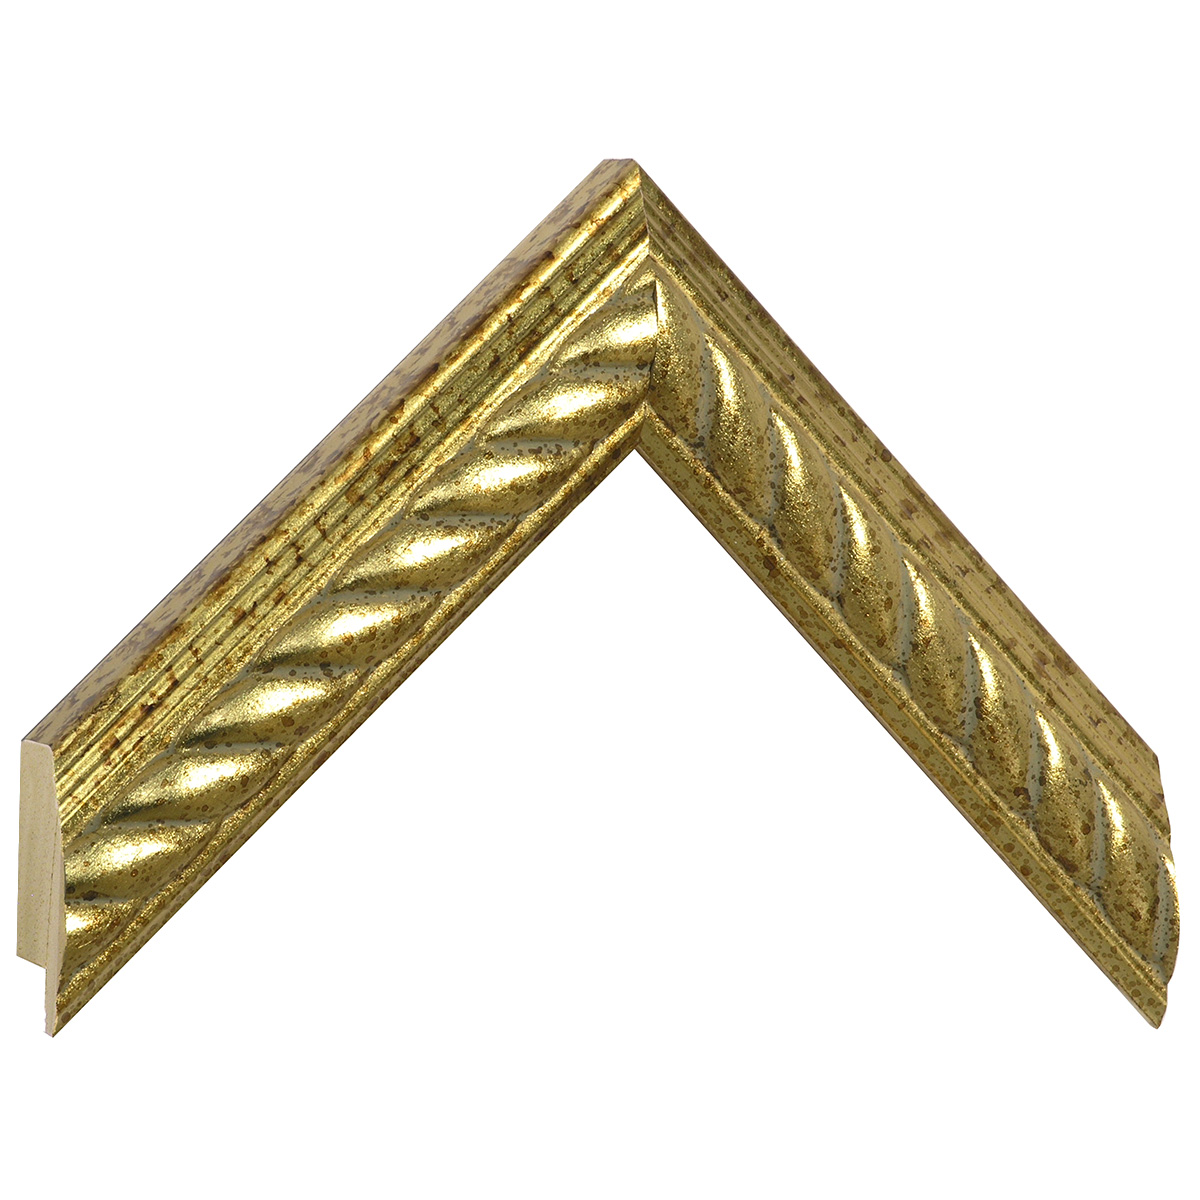 Moulding ayous 35mm - gold, embossed with plaits - Sample